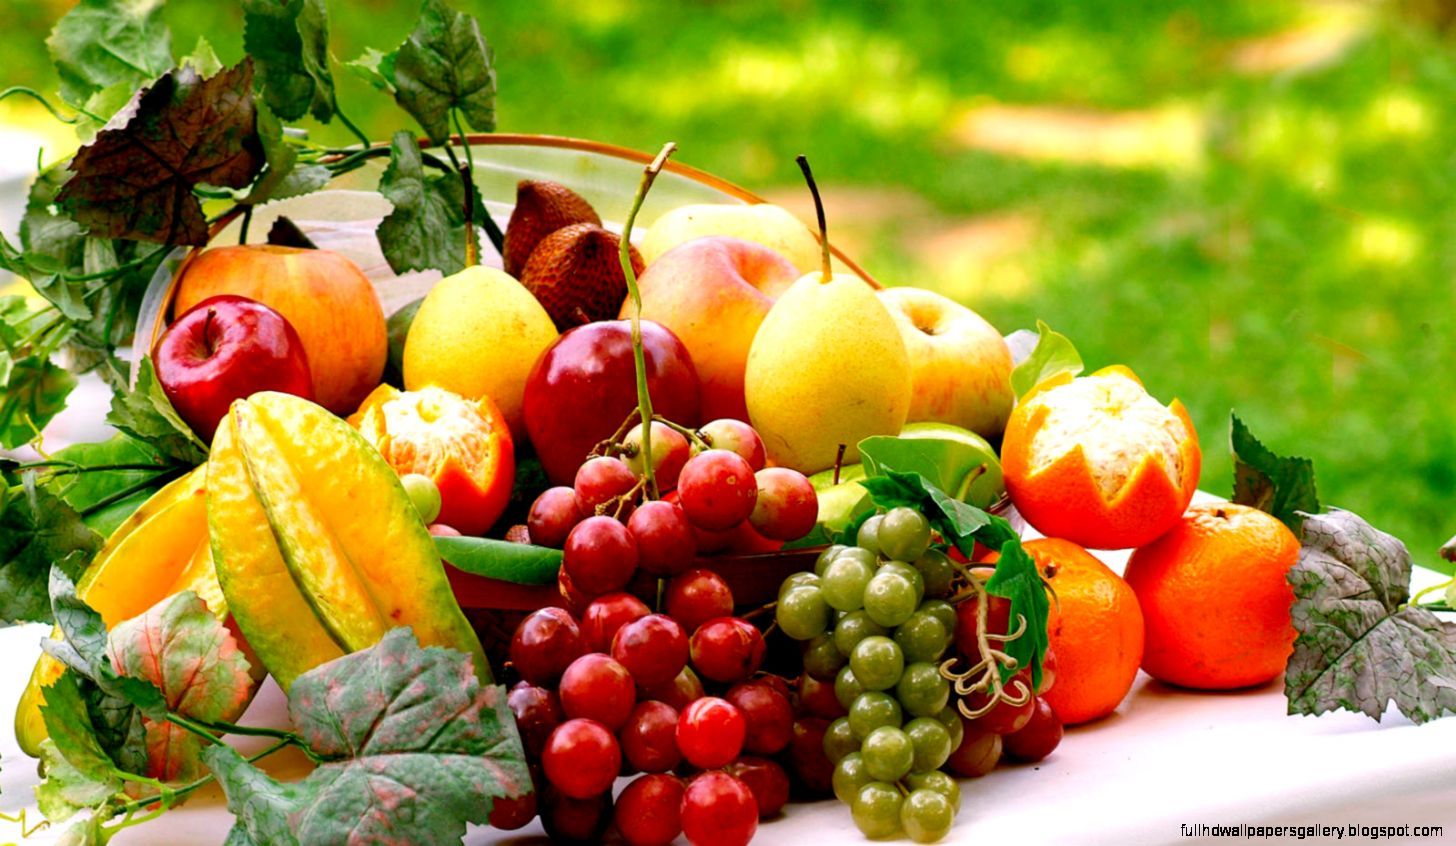 Fruits And Vegetables Image HD. Full HD Wallpaper